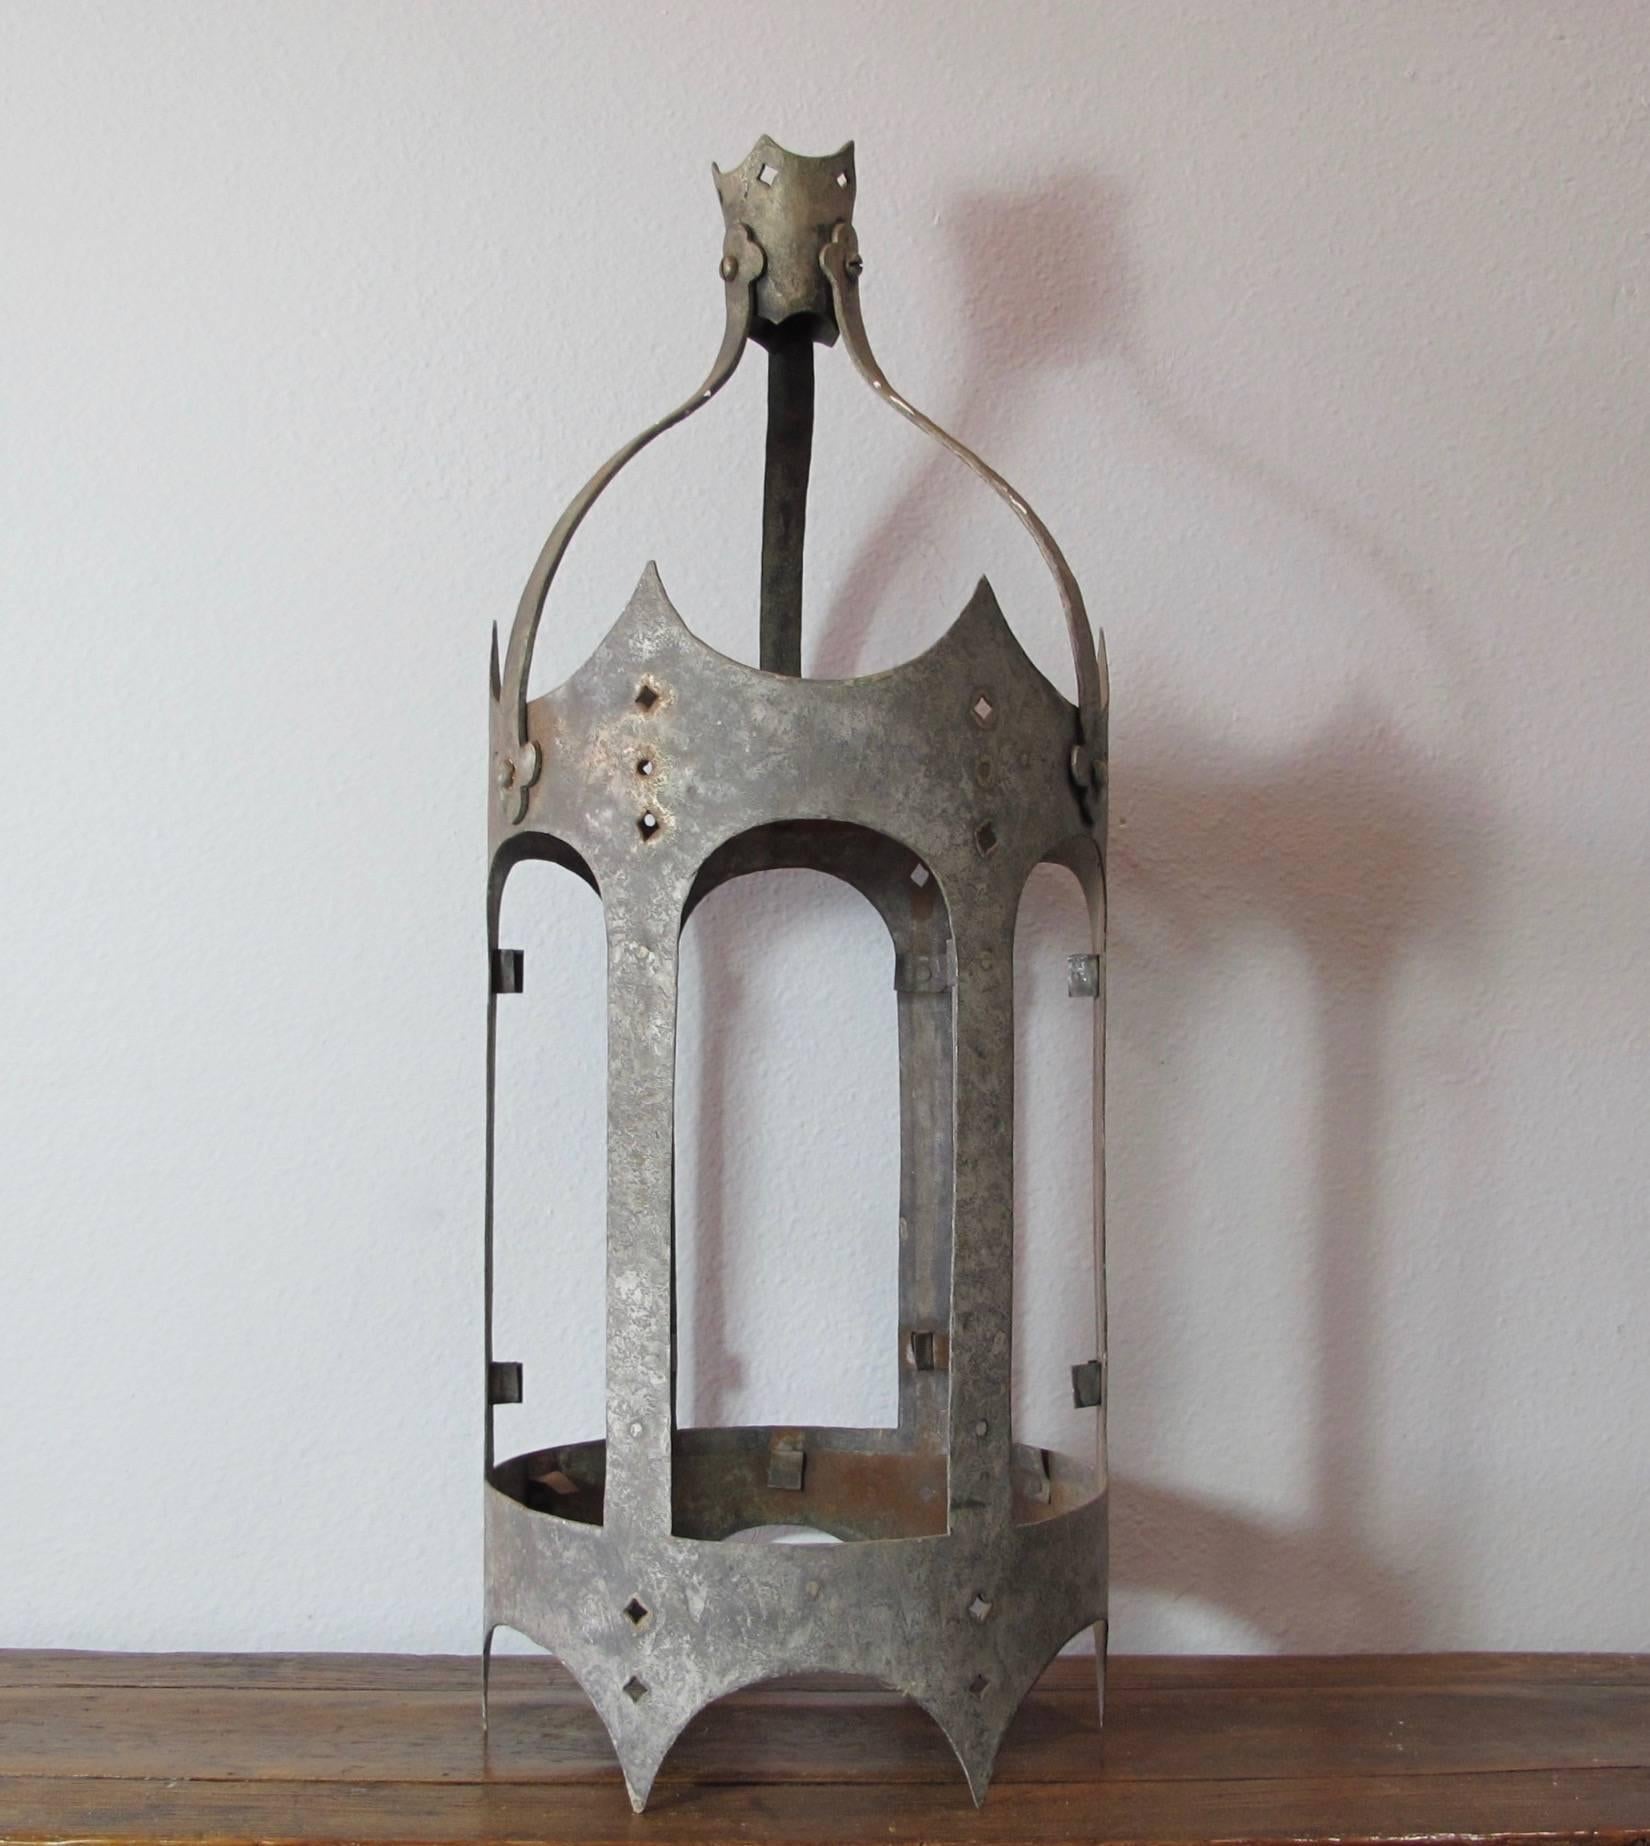 Great antique zinc lantern in the Tudor style with original patina. Not wired for electrical use, purely decorative piece. Has a beautiful coloring to it, perfect for a table or outdoor area with candles inside. Originally held glass, not included